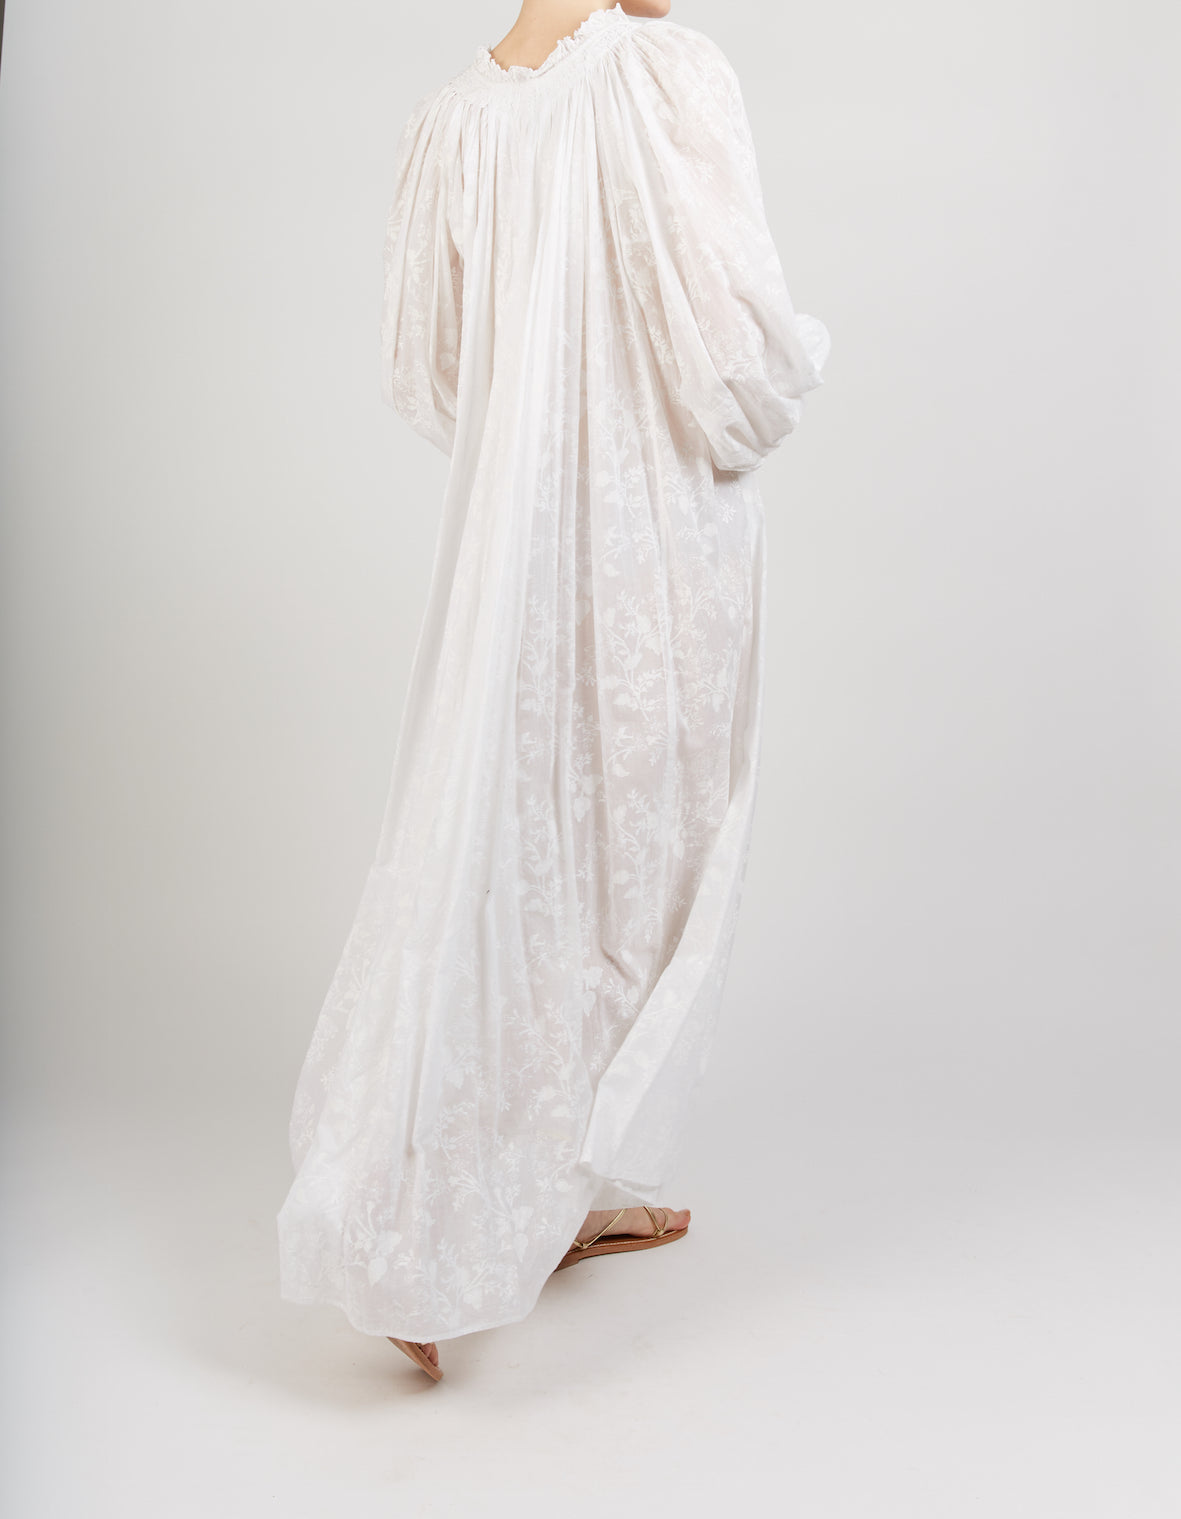 Back view of Vladia Chintz White long Dress by Thierry Colson